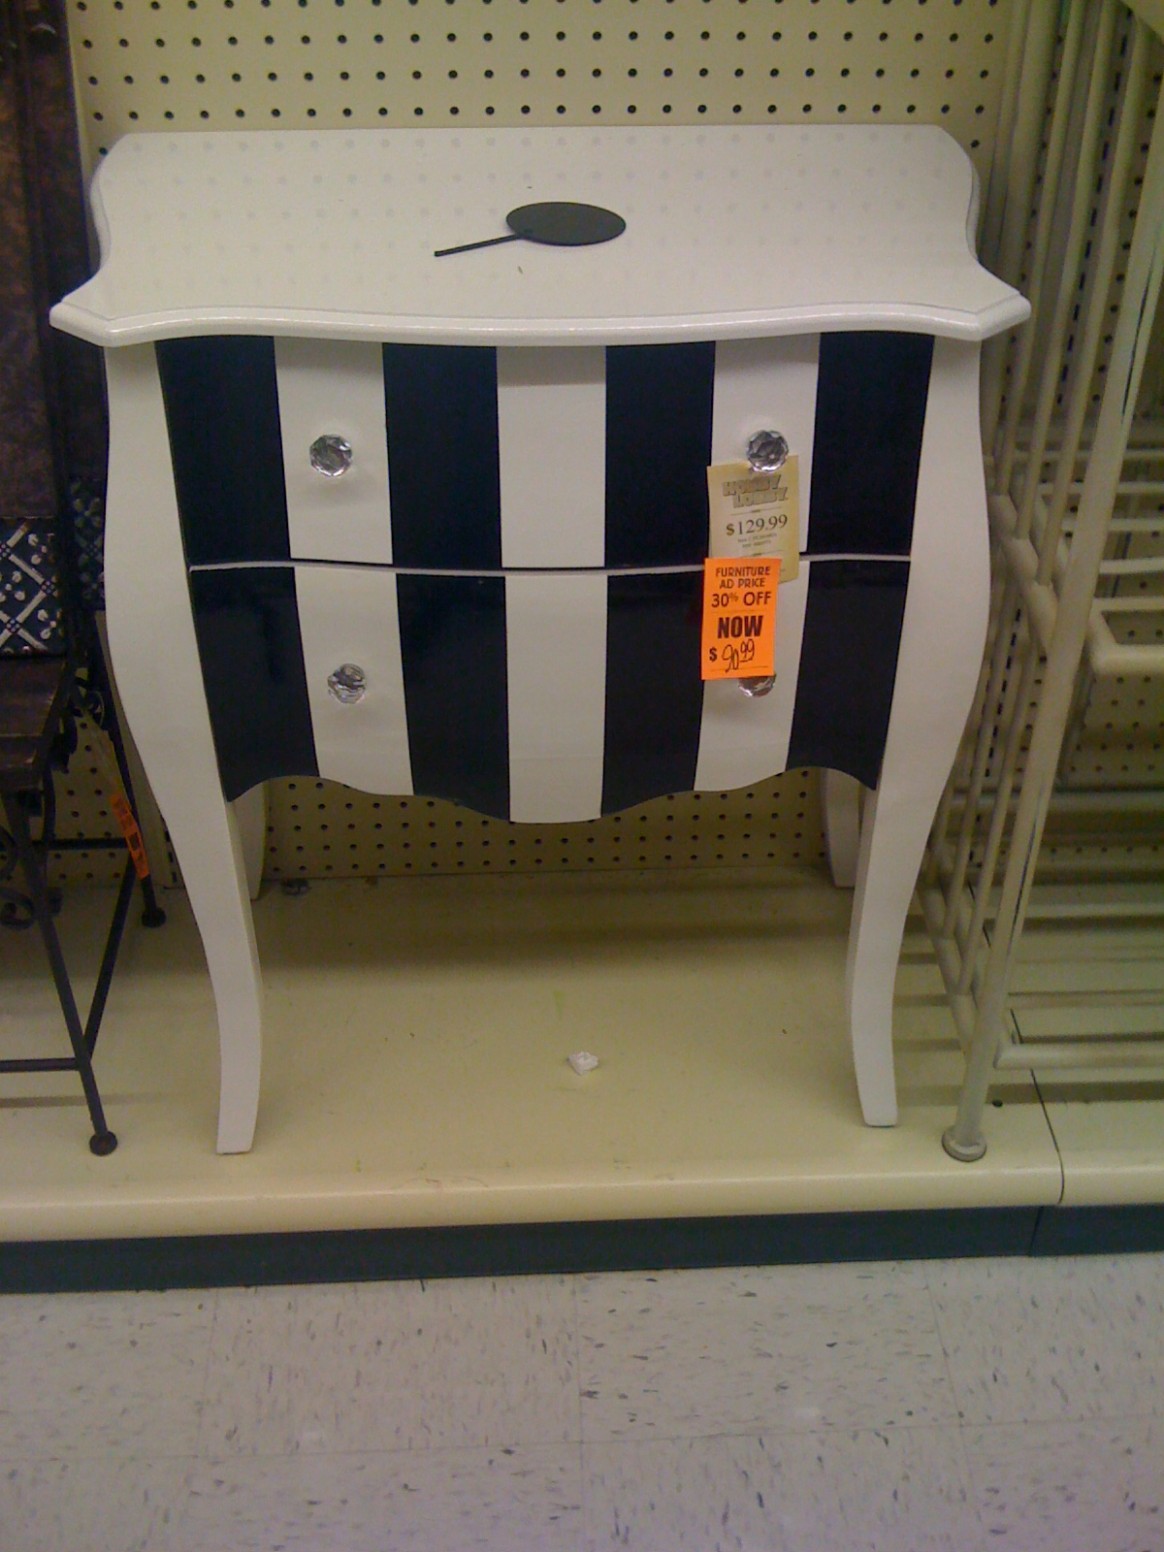 Furniture Hobby Lobby Furniture Sale With Stylish Liner ..